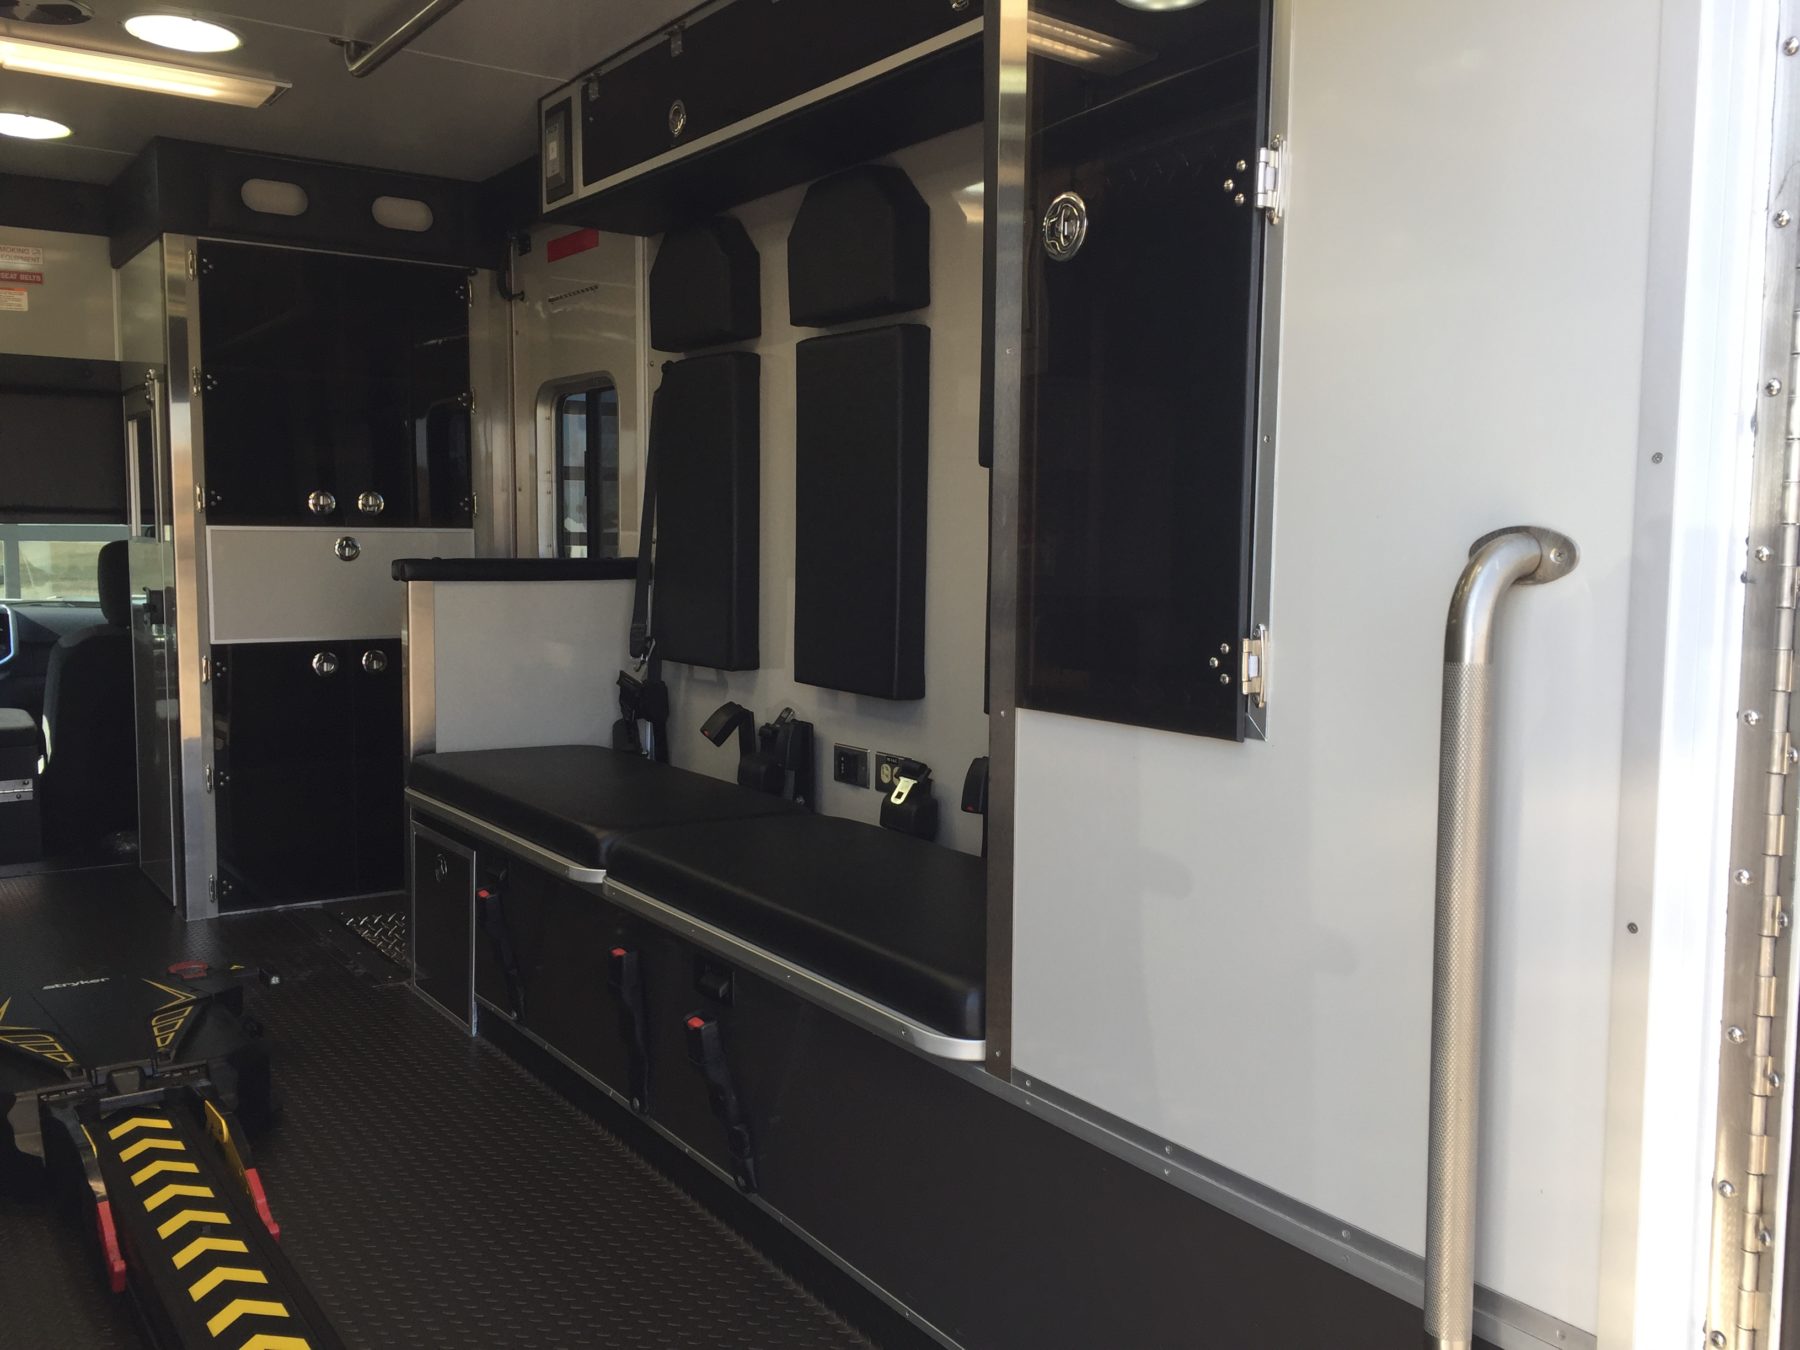 2019 Ram 4500 4x4 Heavy Duty Ambulance For Sale – Picture 12